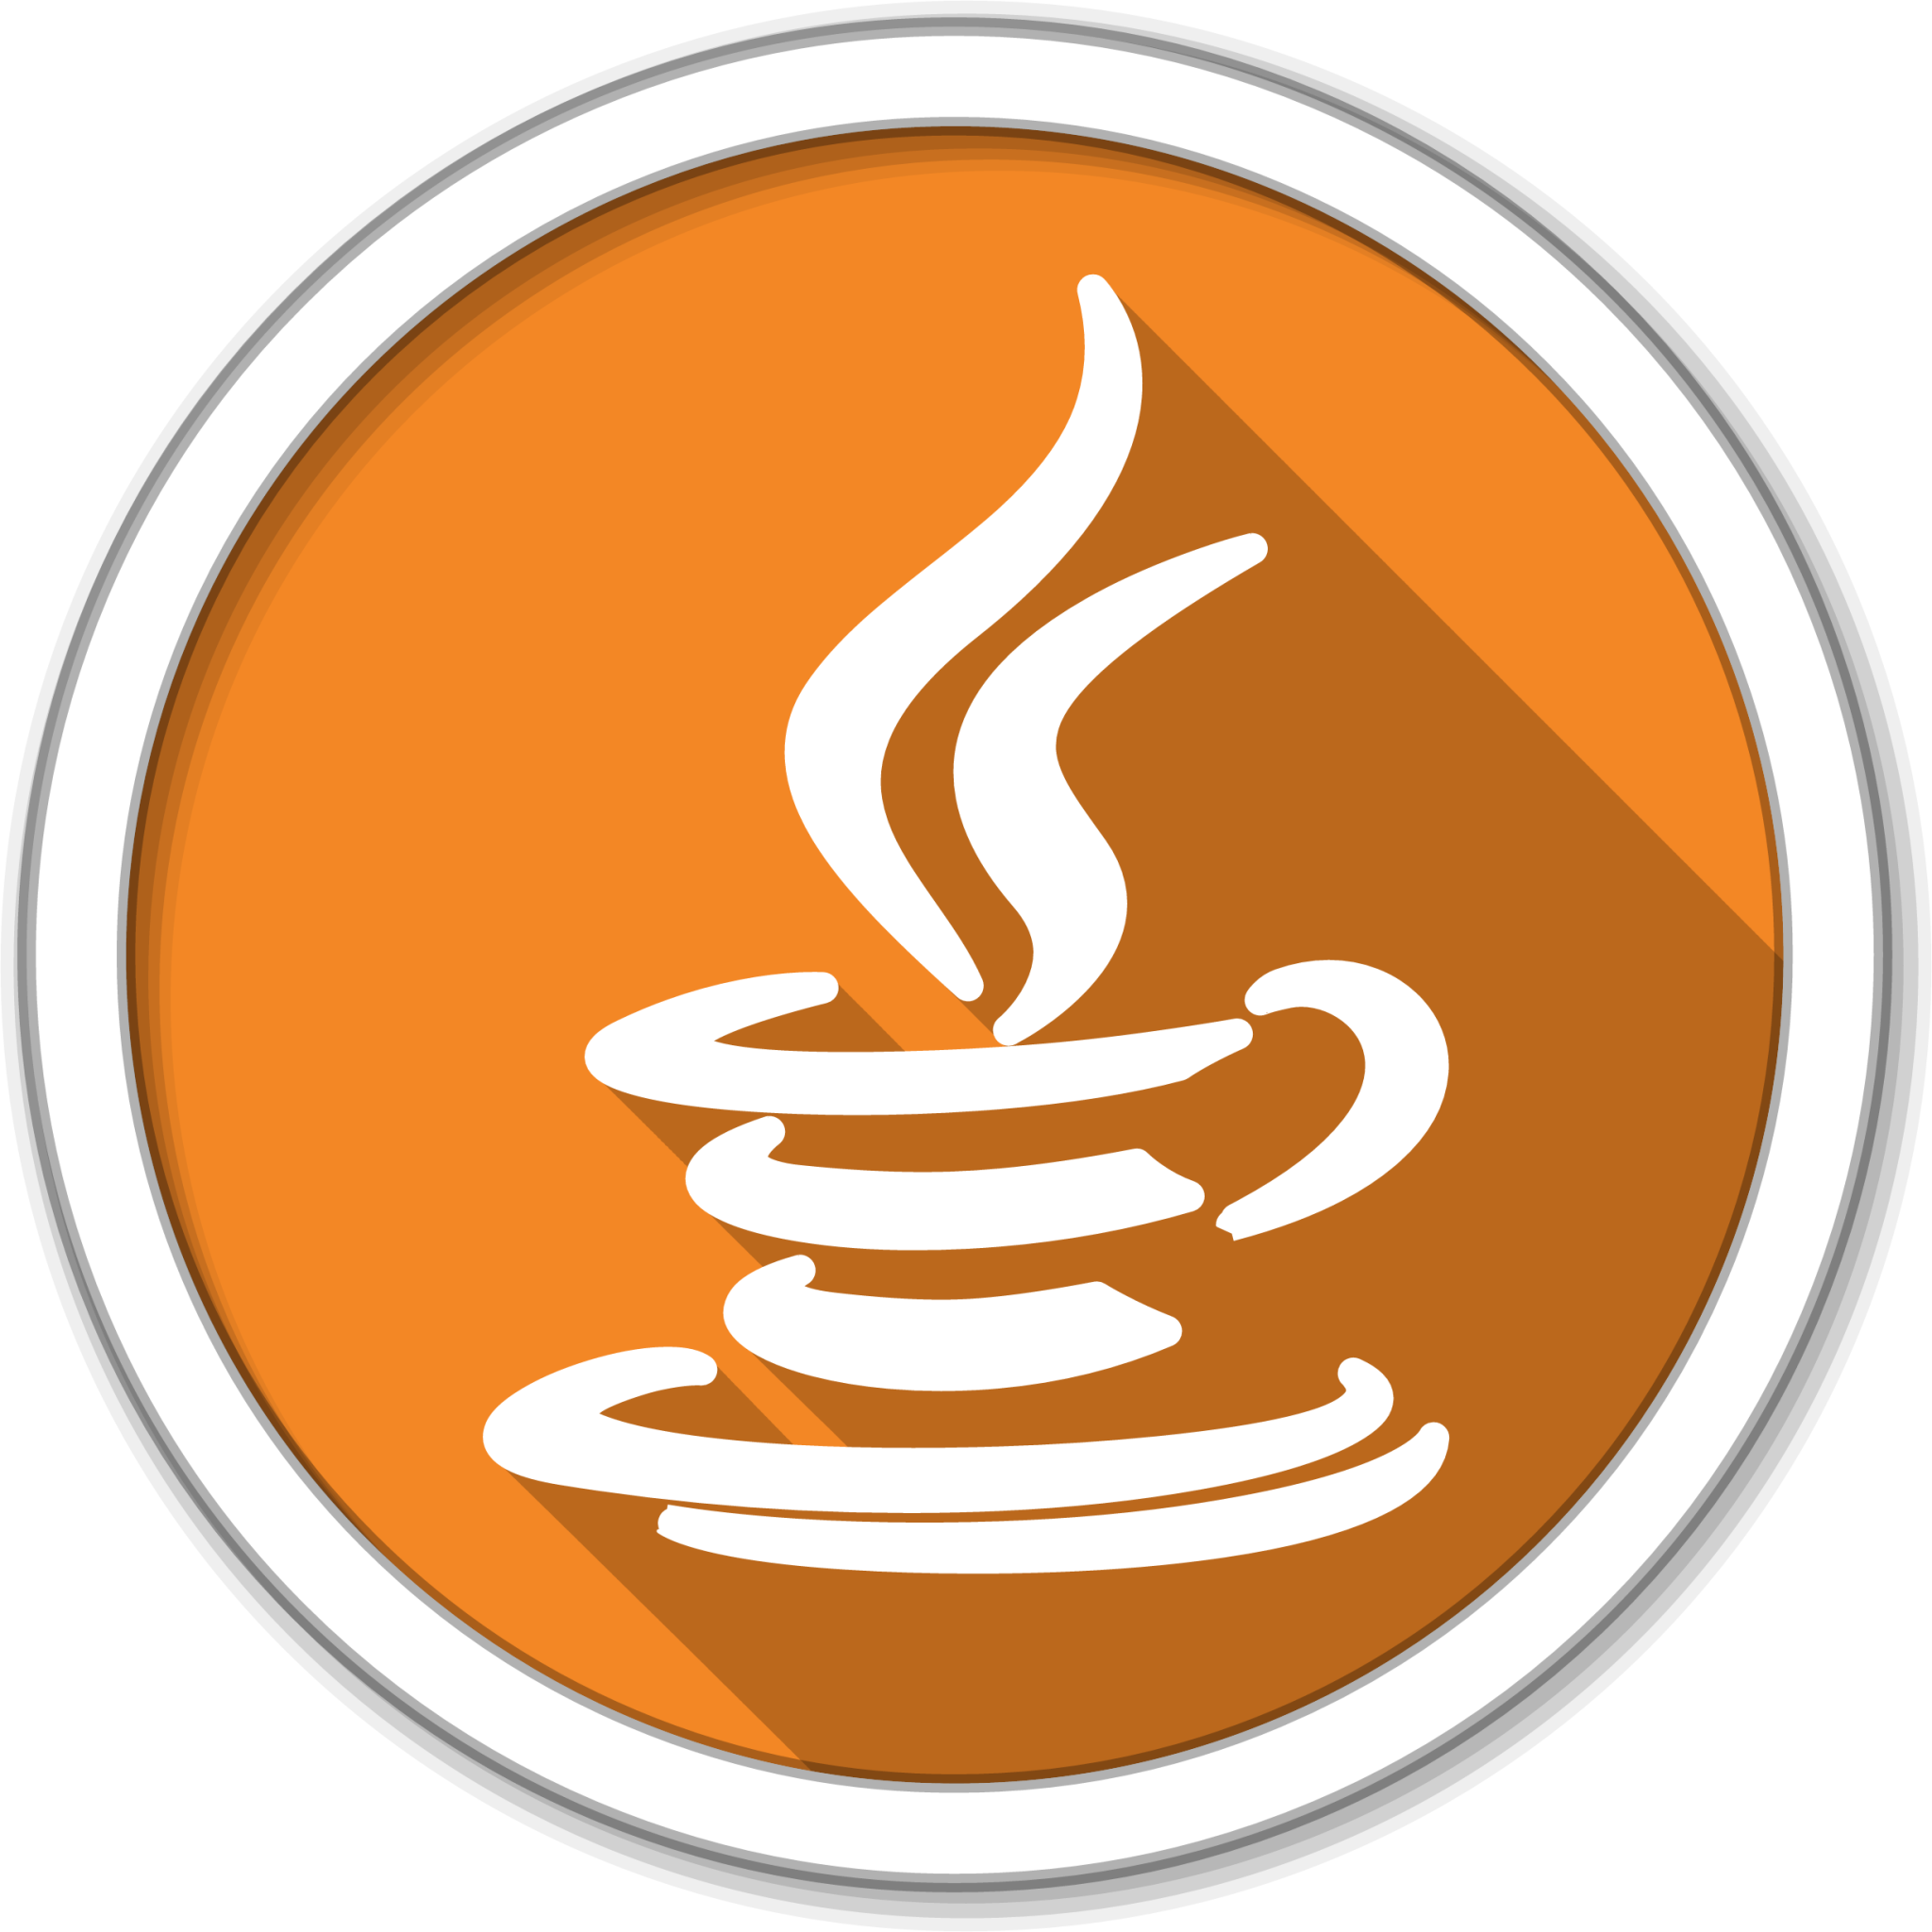 Java Logo and symbol, meaning, history, sign.